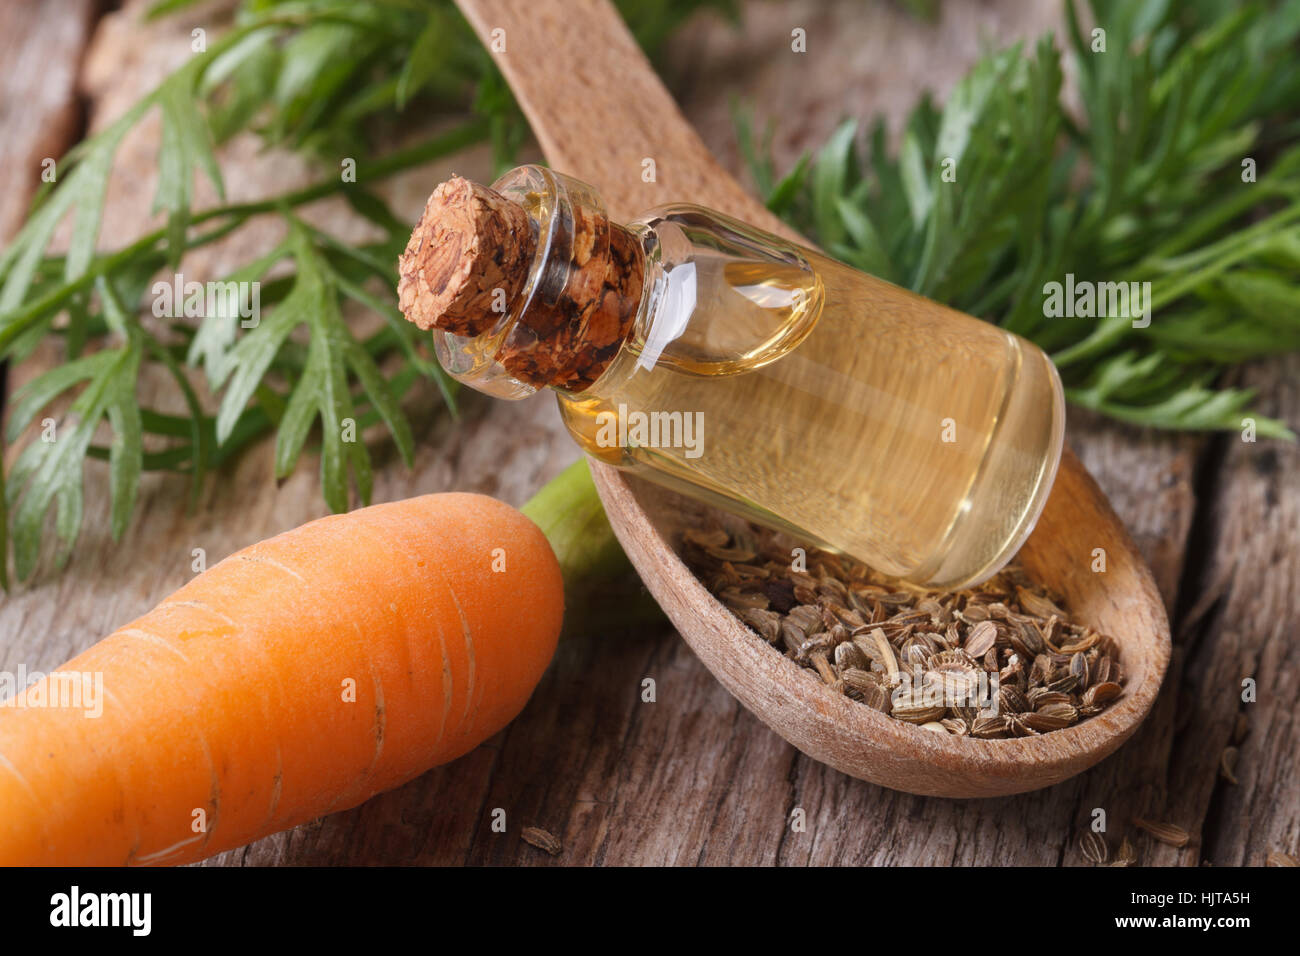 Useful carrot seed oil in glass bottle on the table close-up horizontal. Stock Photo